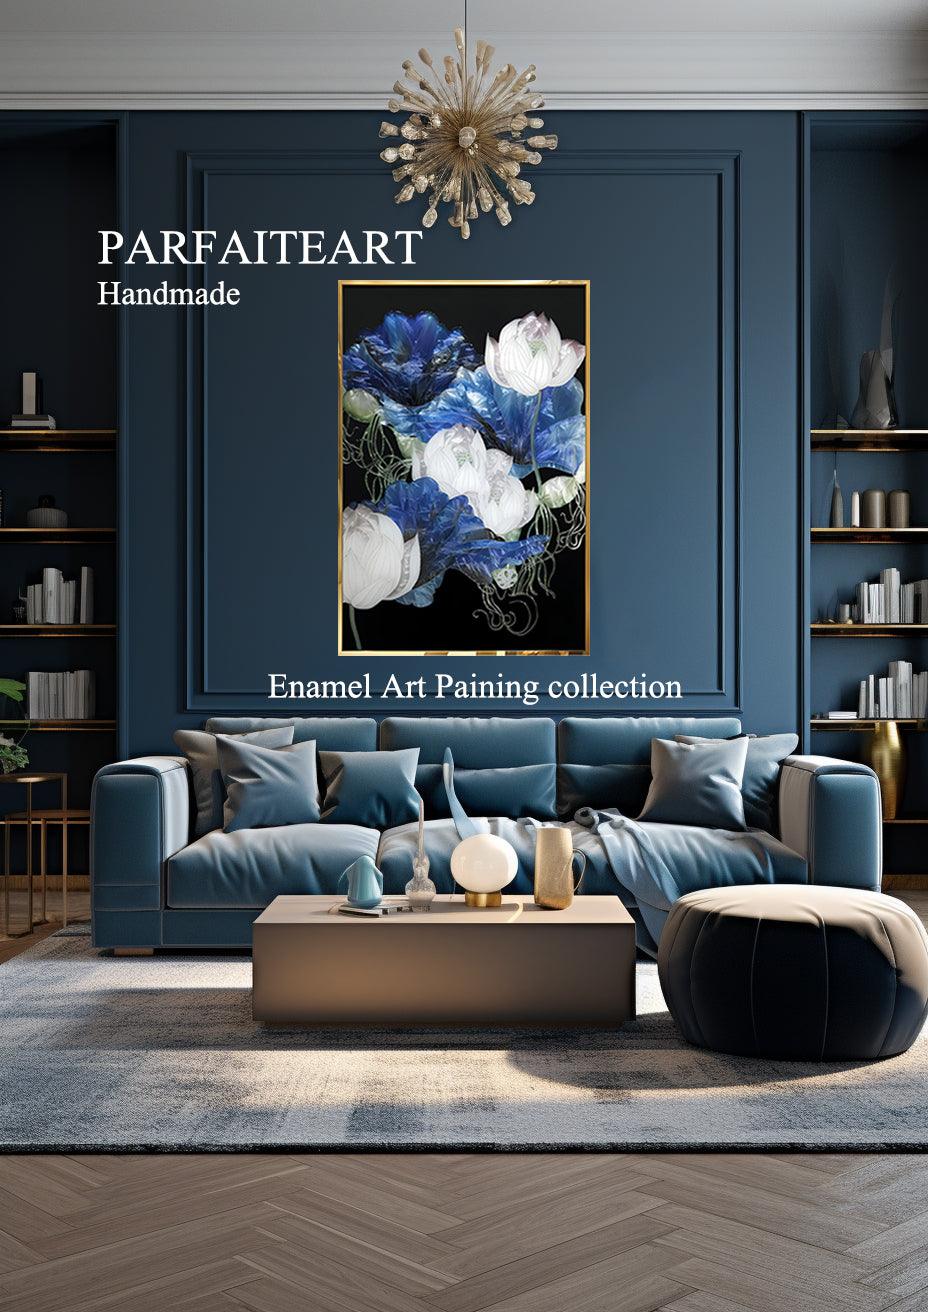 Lotus Radiance: Handcrafted Enamel Art Deco Lotus Flower Painting – Modern Elegance for Any Space